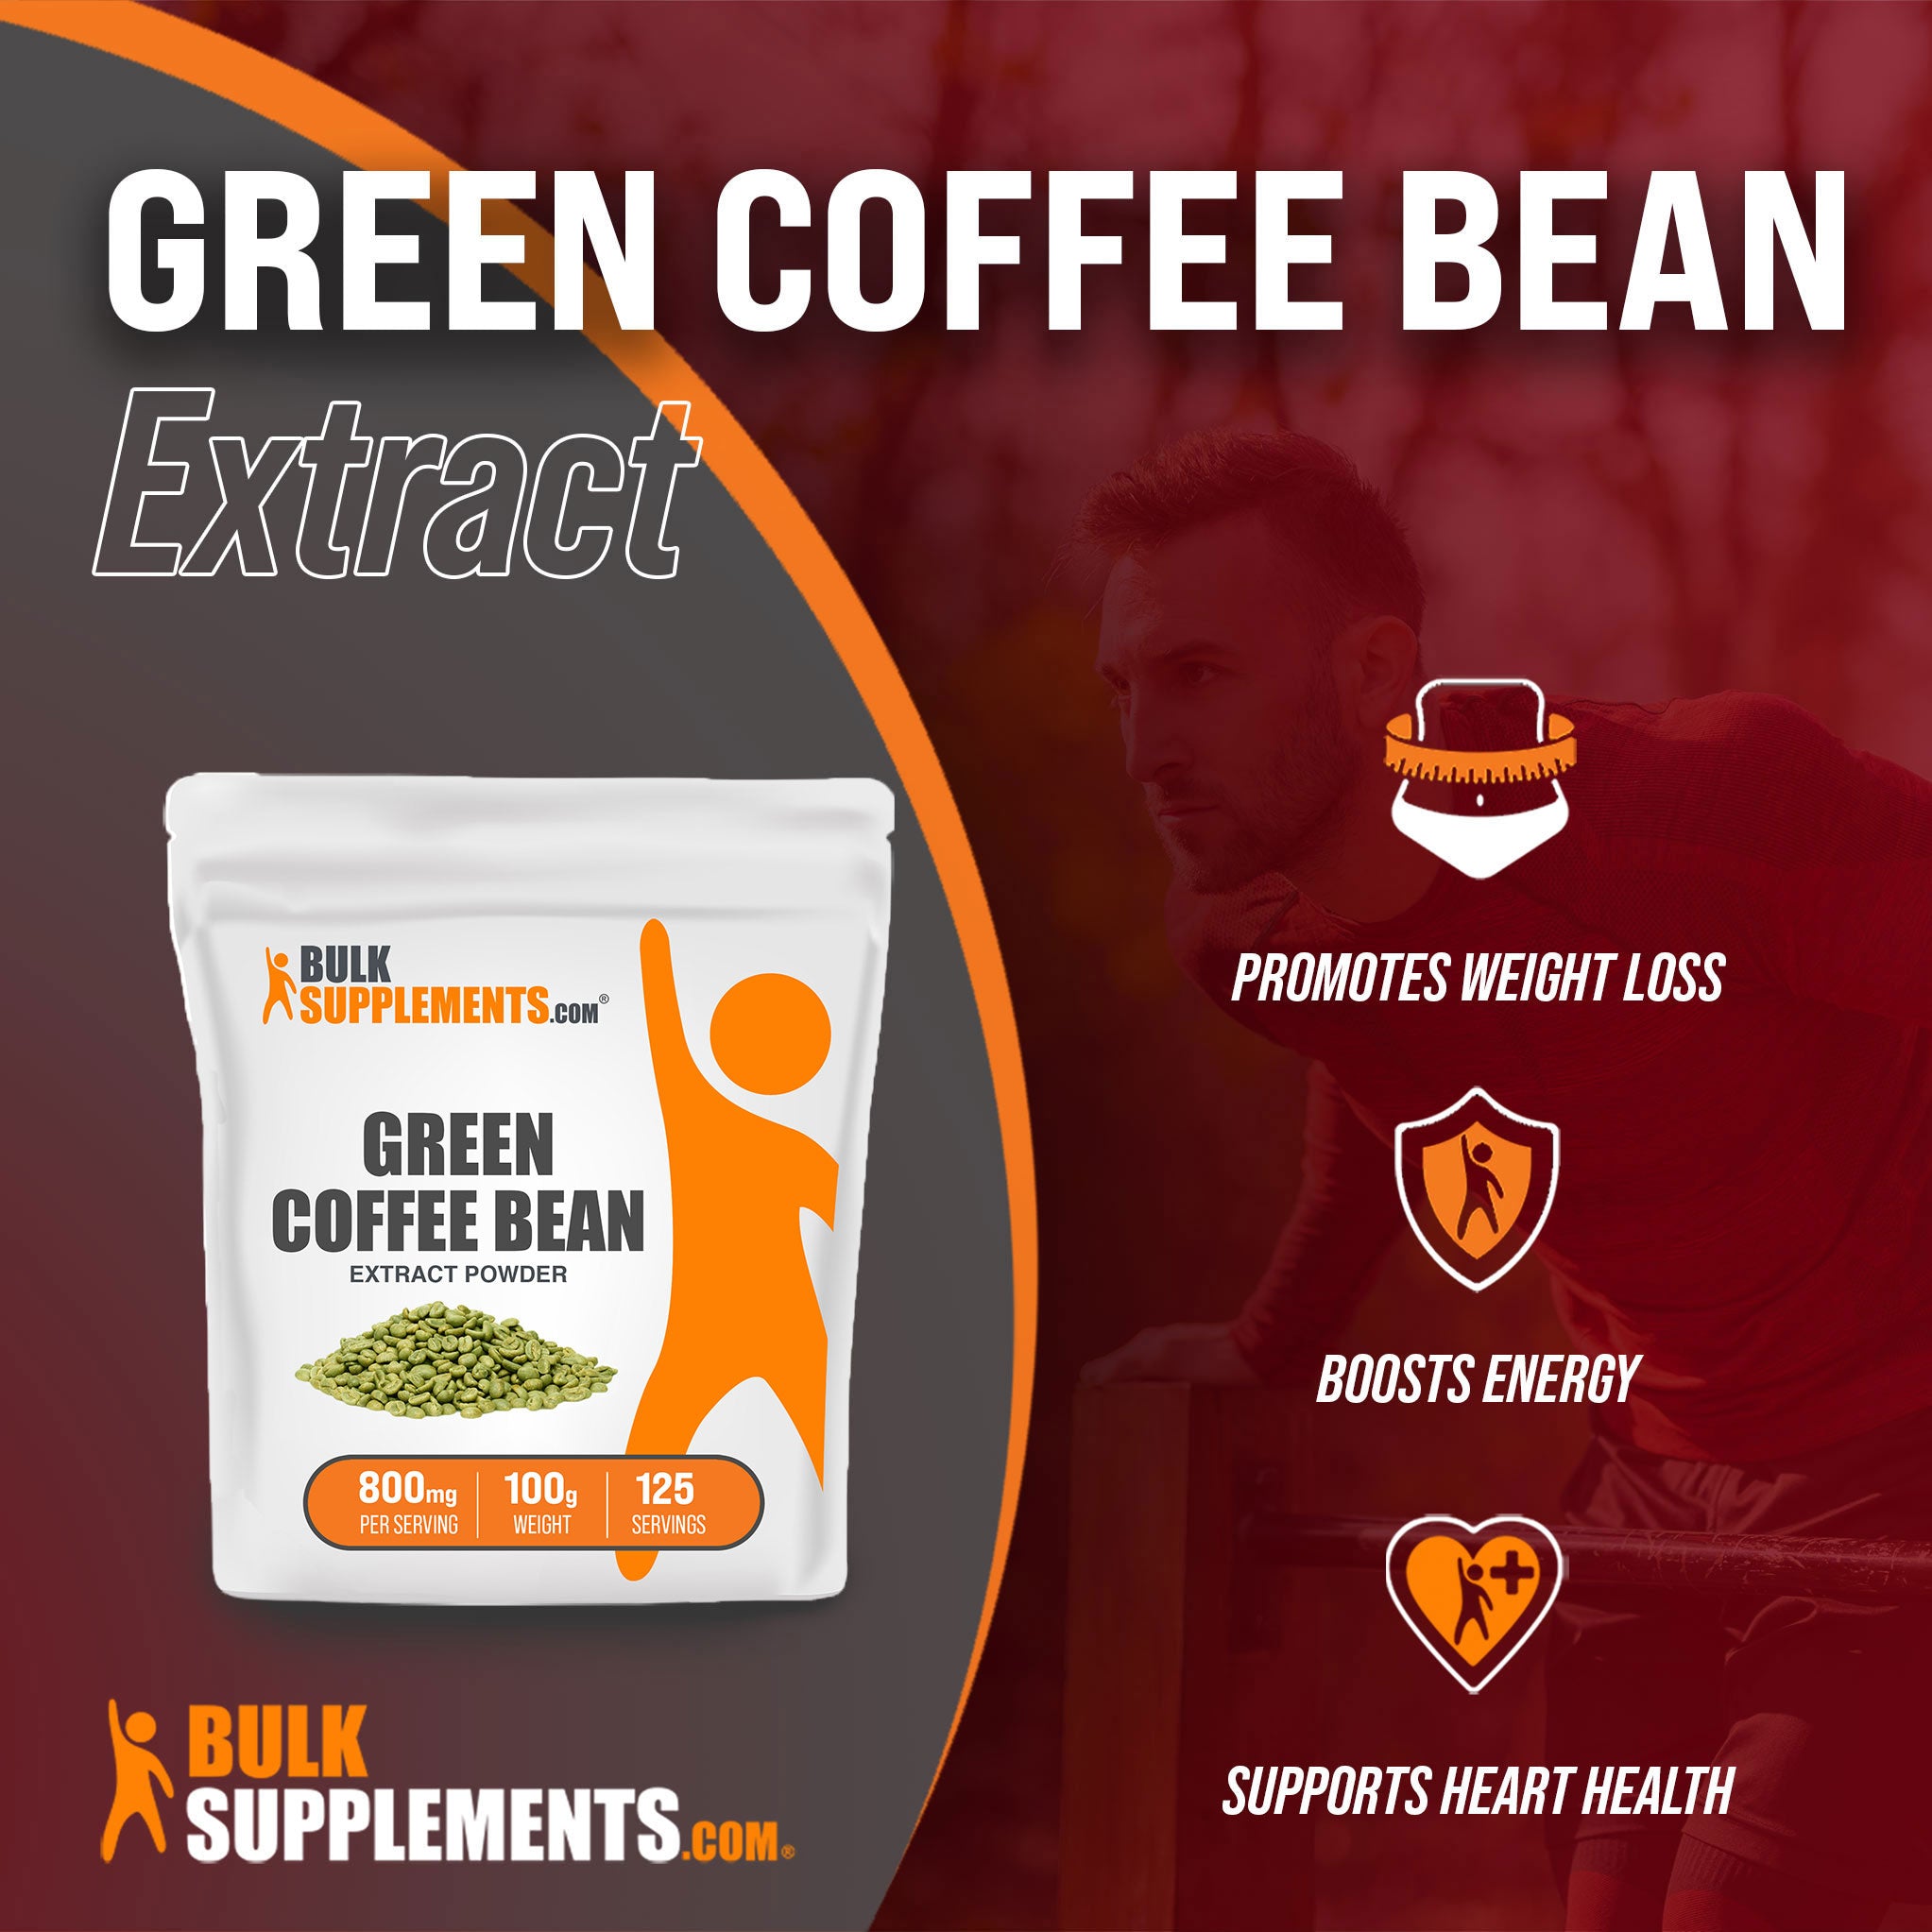 Benefits of Green Coffee Bean Extract; promotes weight loss, boosts energy, supports heart health